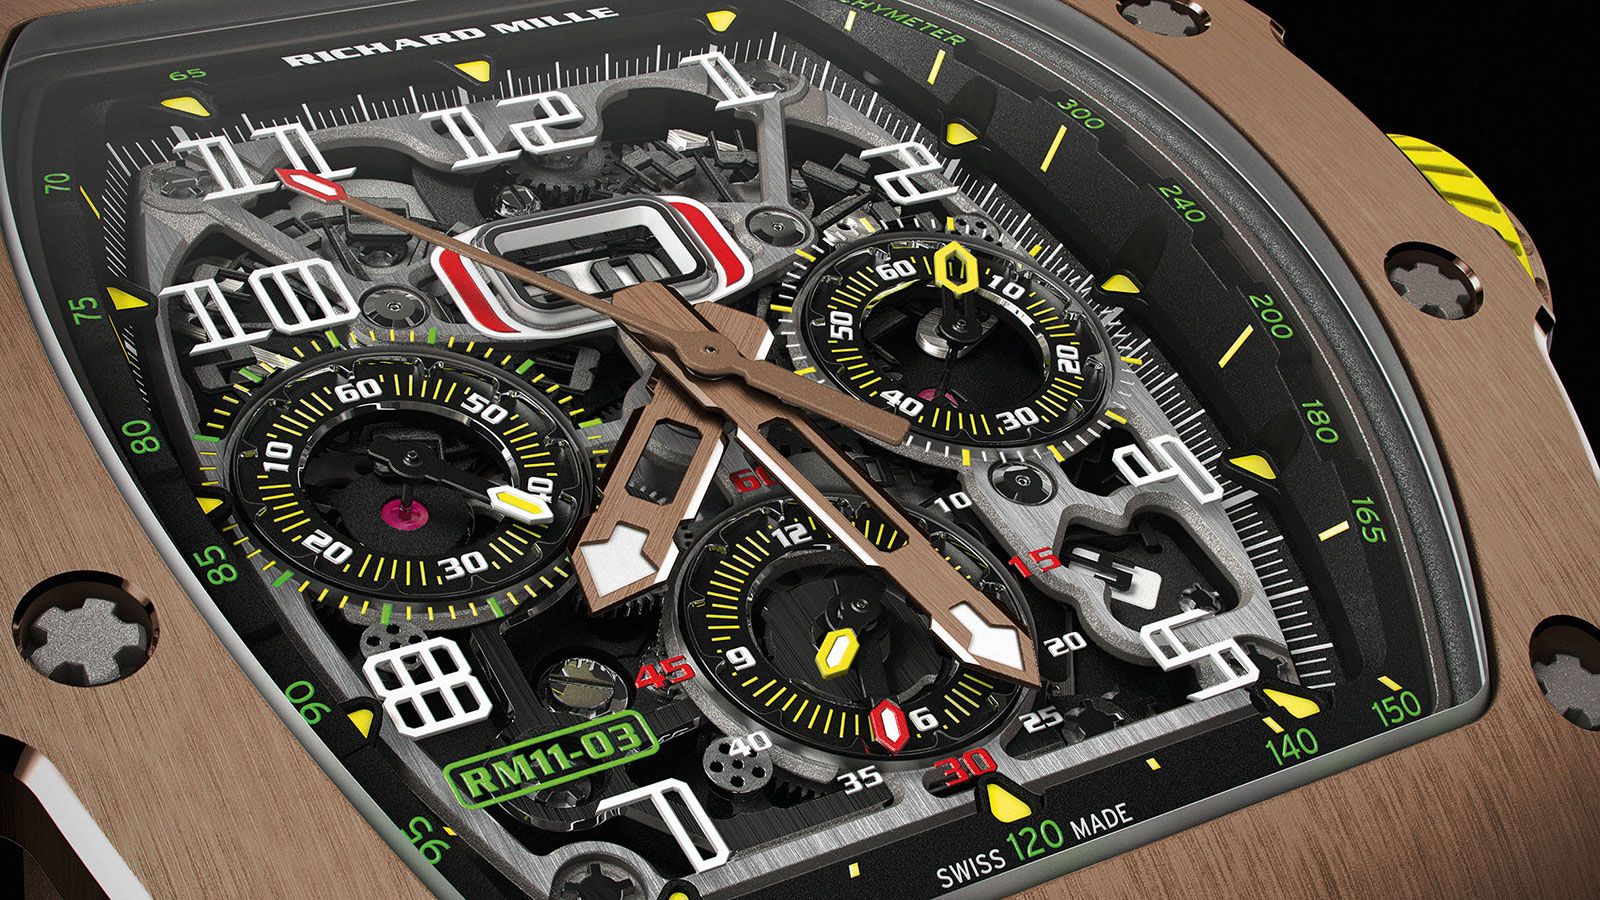 Richard Mille Facelifts the Bestselling RM 11 Chronograph. SJX